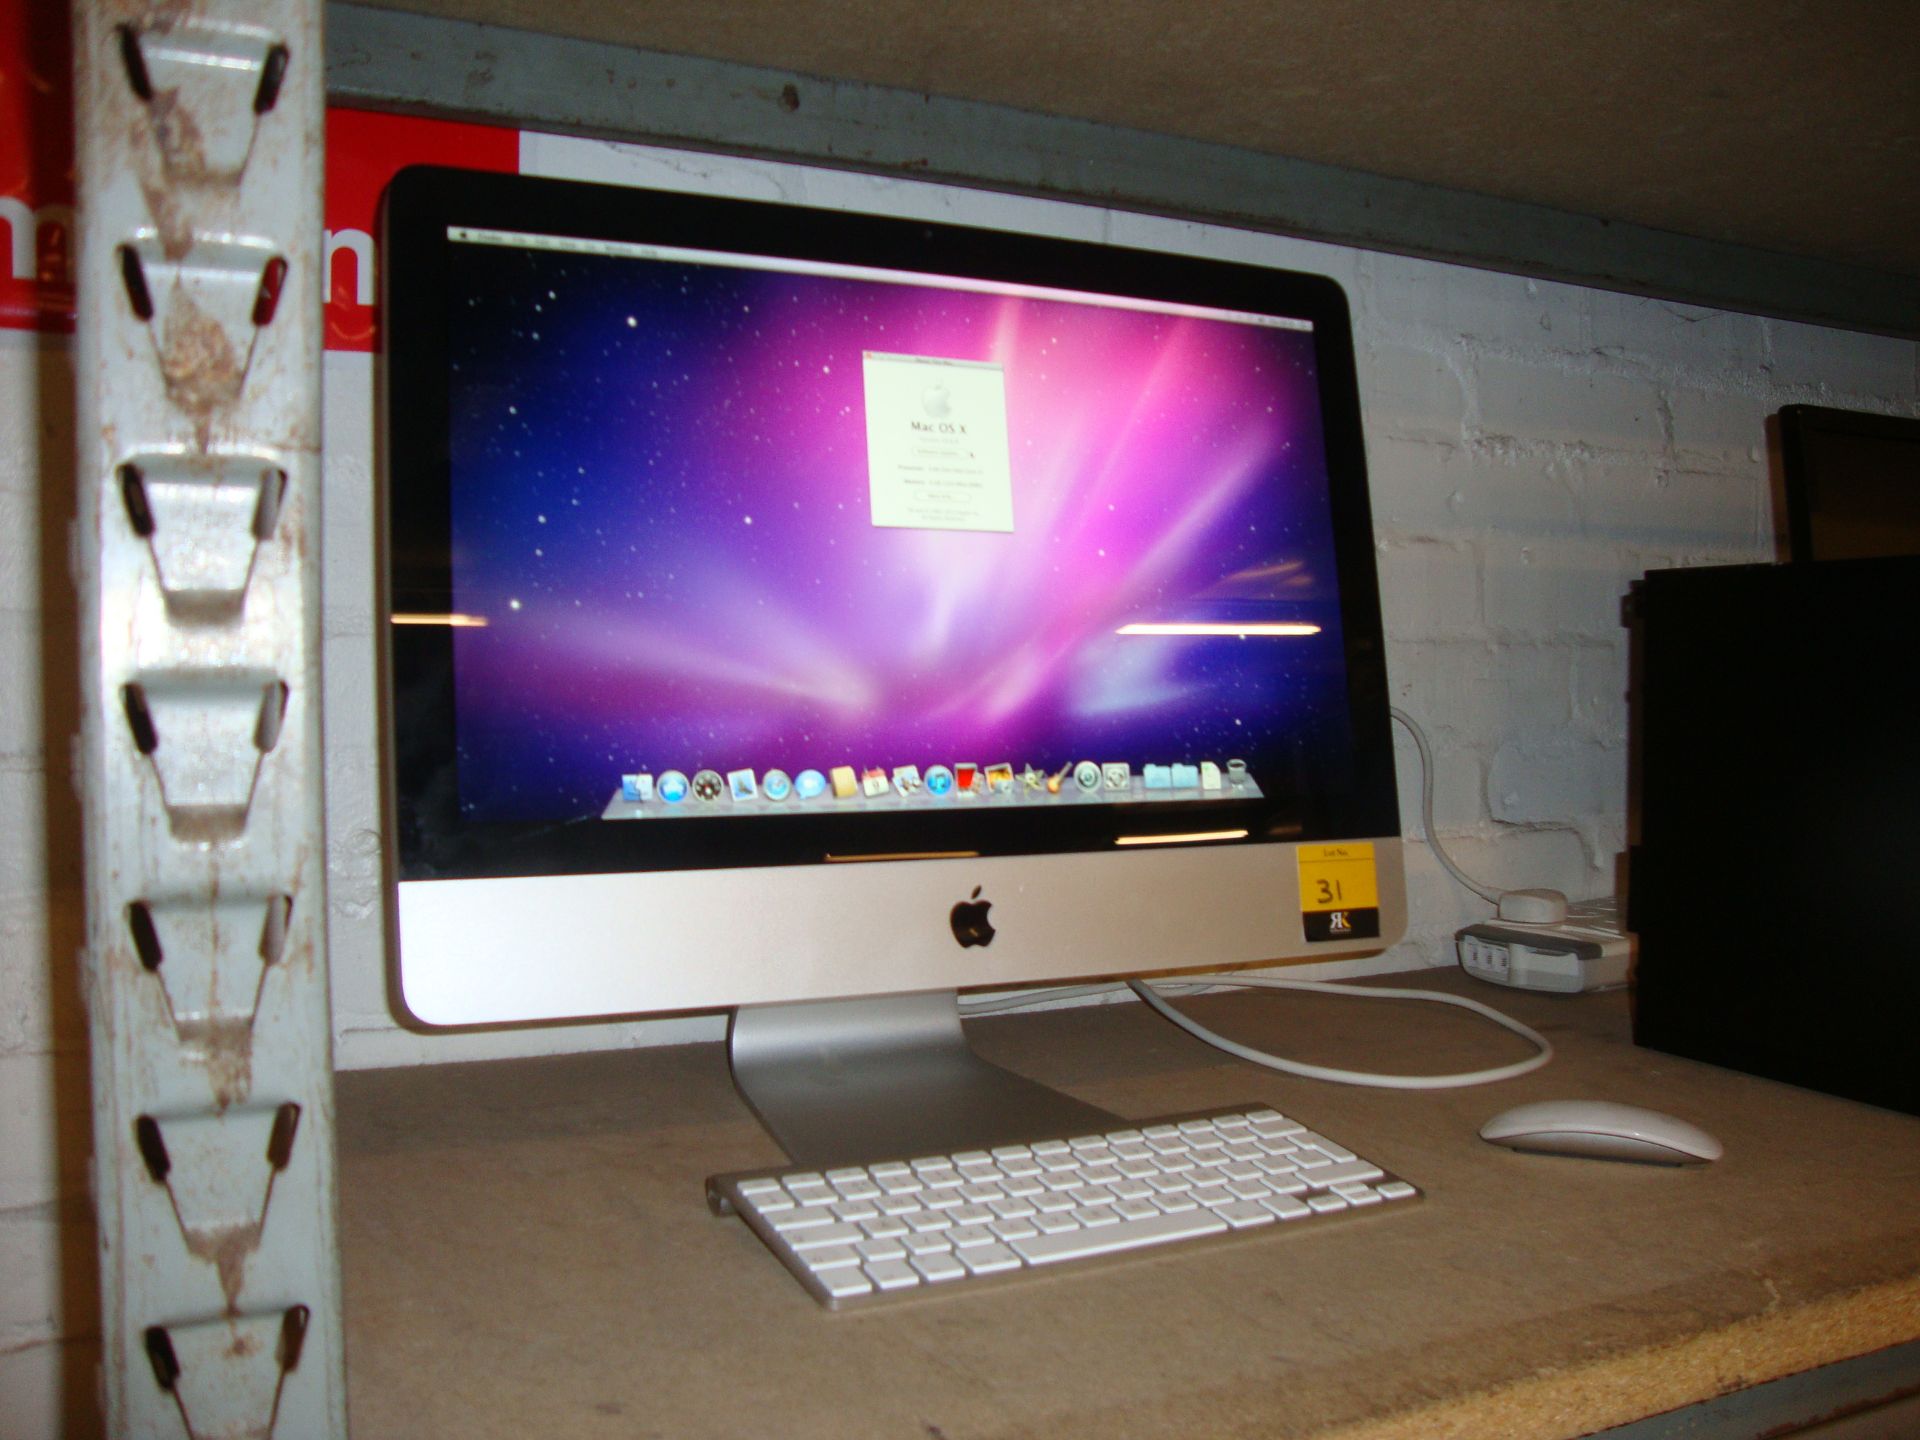 Apple iMac Intel Core i3 @ 3.06GHz, 4Gb RAM, 500Gb hard drive all-in-one computer model A1311 - Image 6 of 11